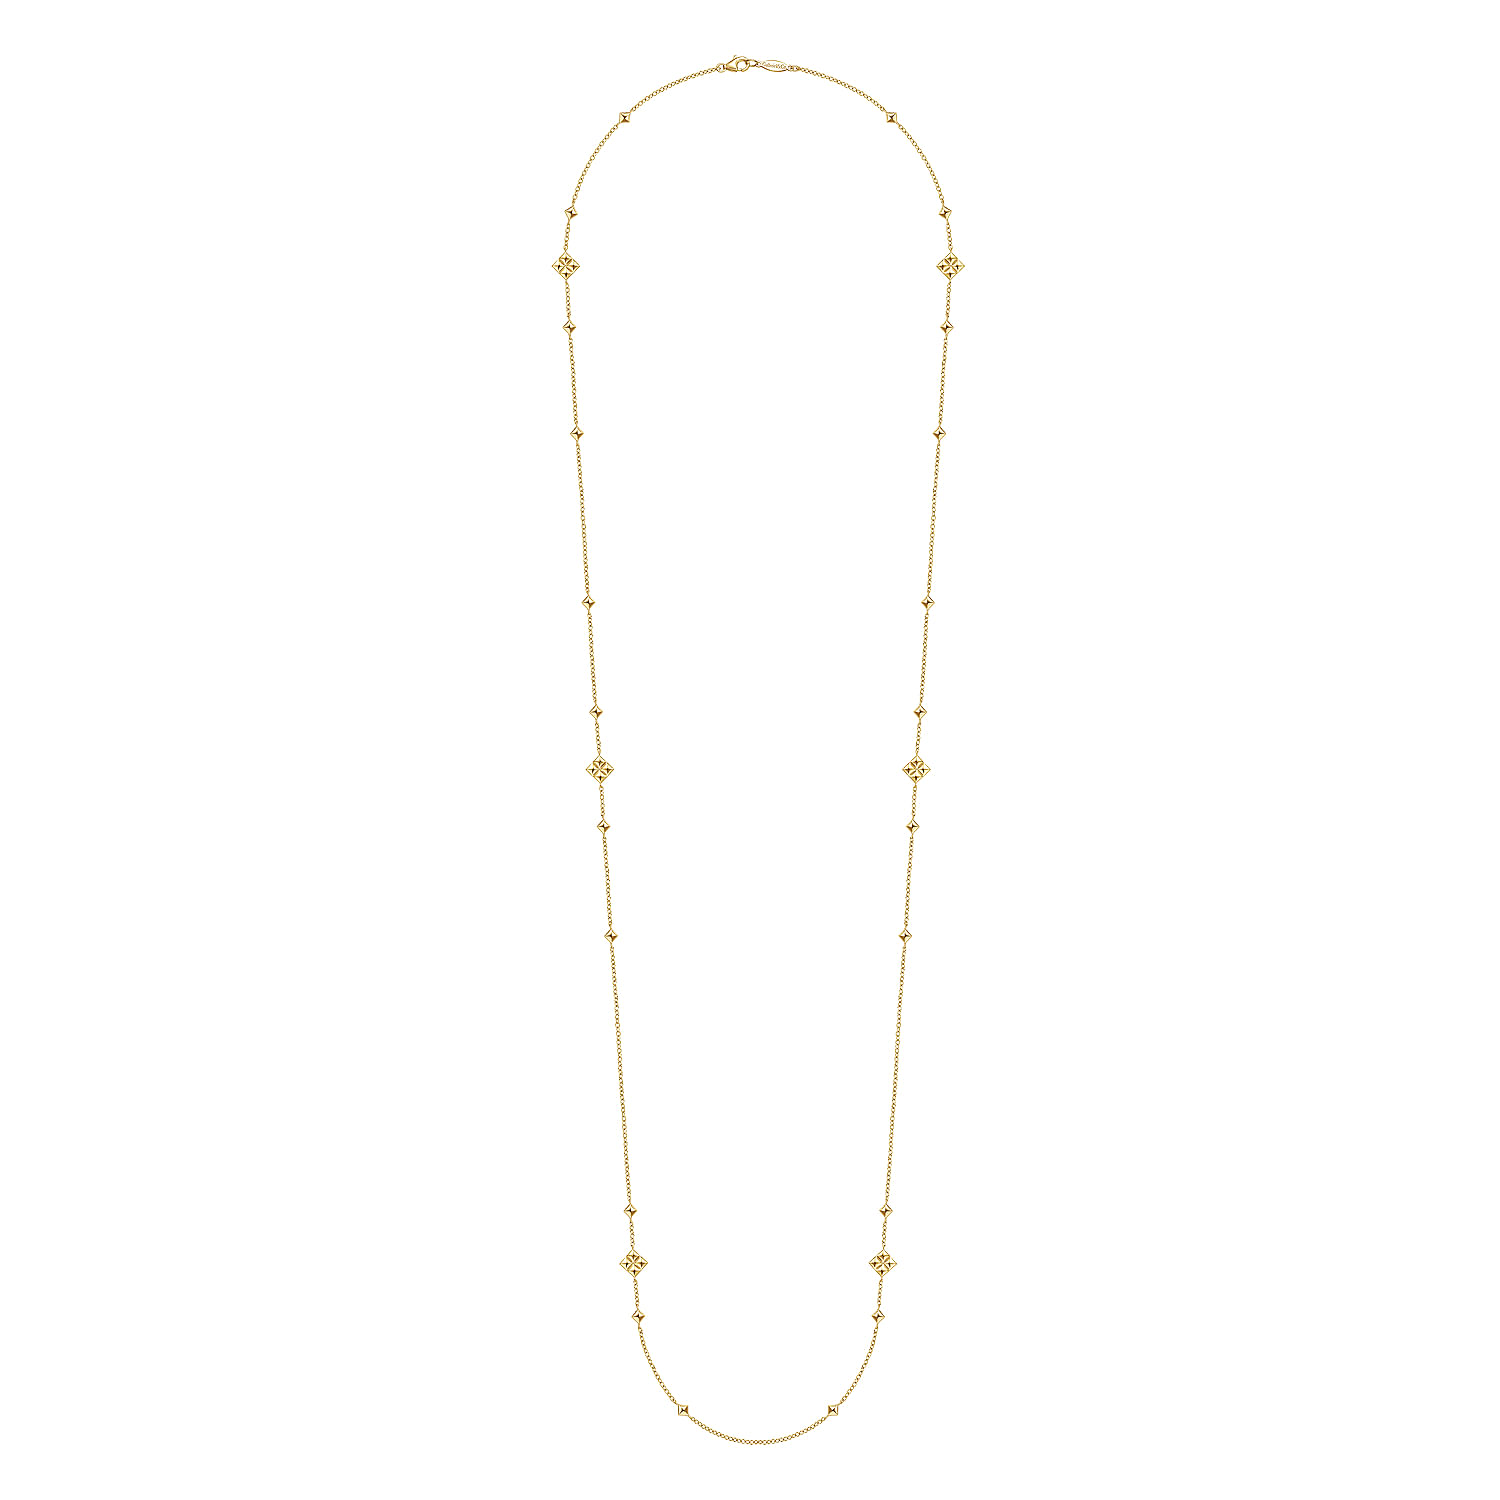 36 inch 14K Yellow Gold Pyramid Quatrefoil Station Necklace